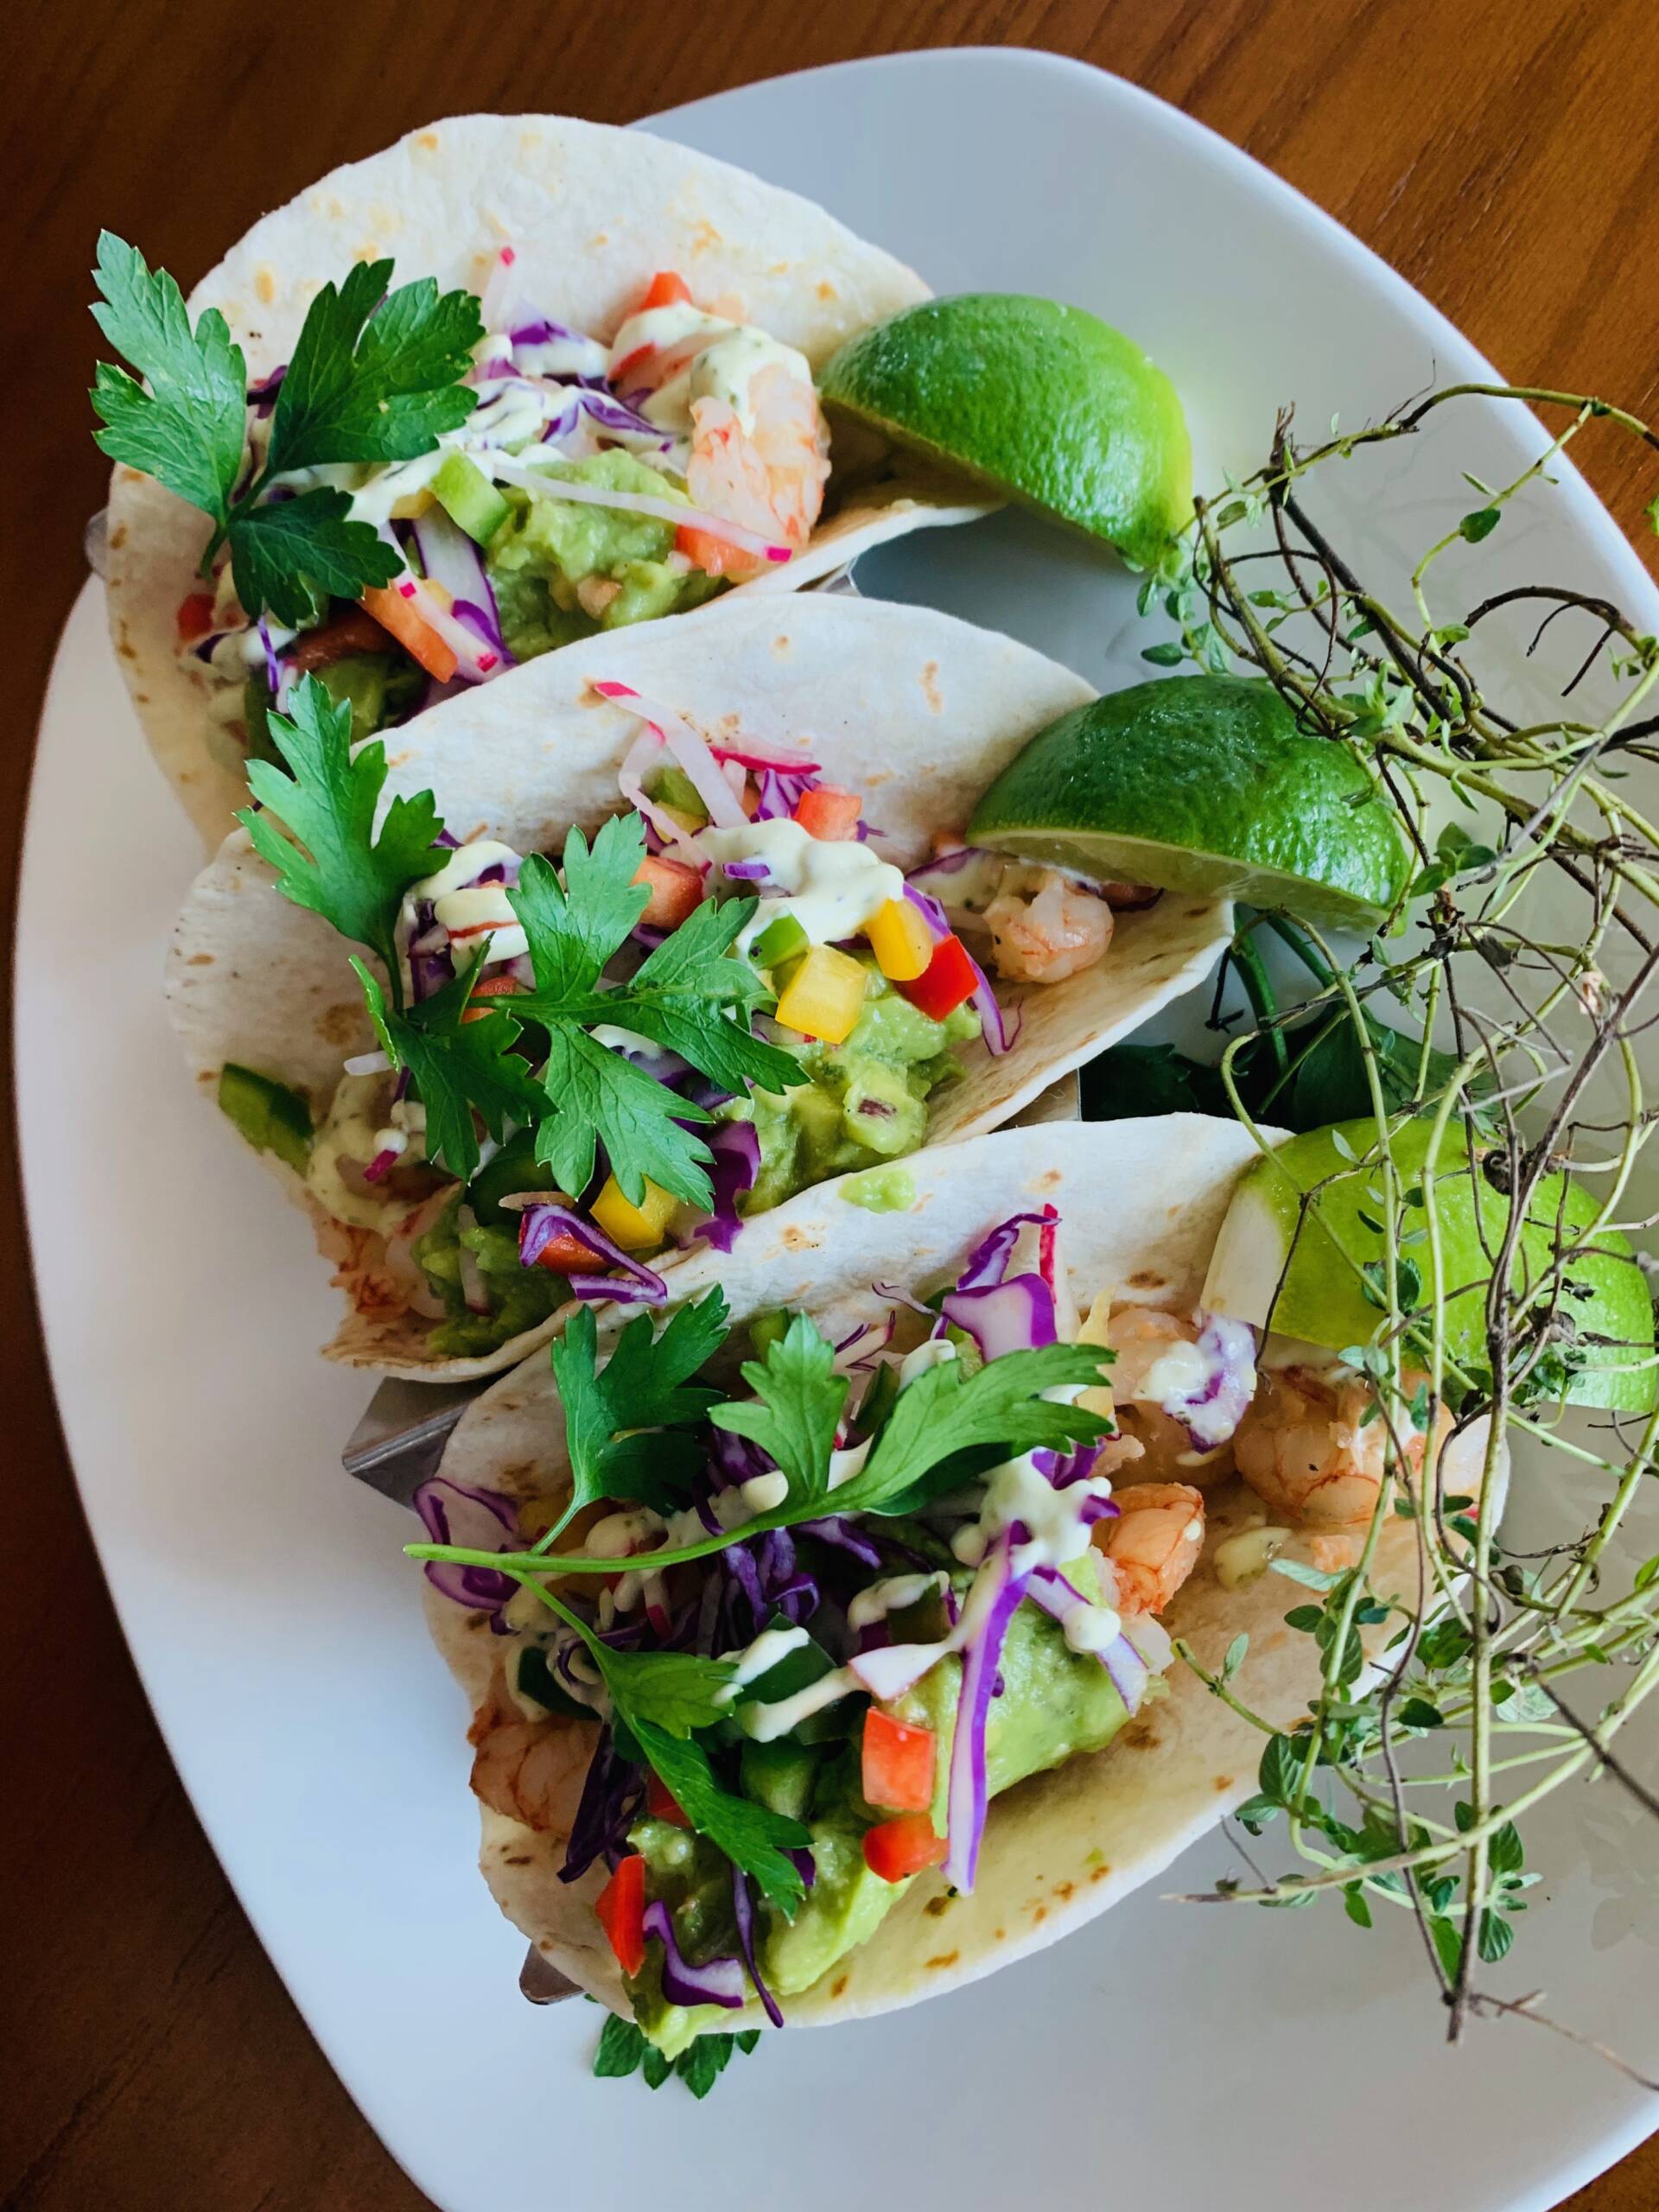 Sauteed Snapper Fish Tacos with Shredded Cabbage, Chipotle Mayo in three Flour Tortillas